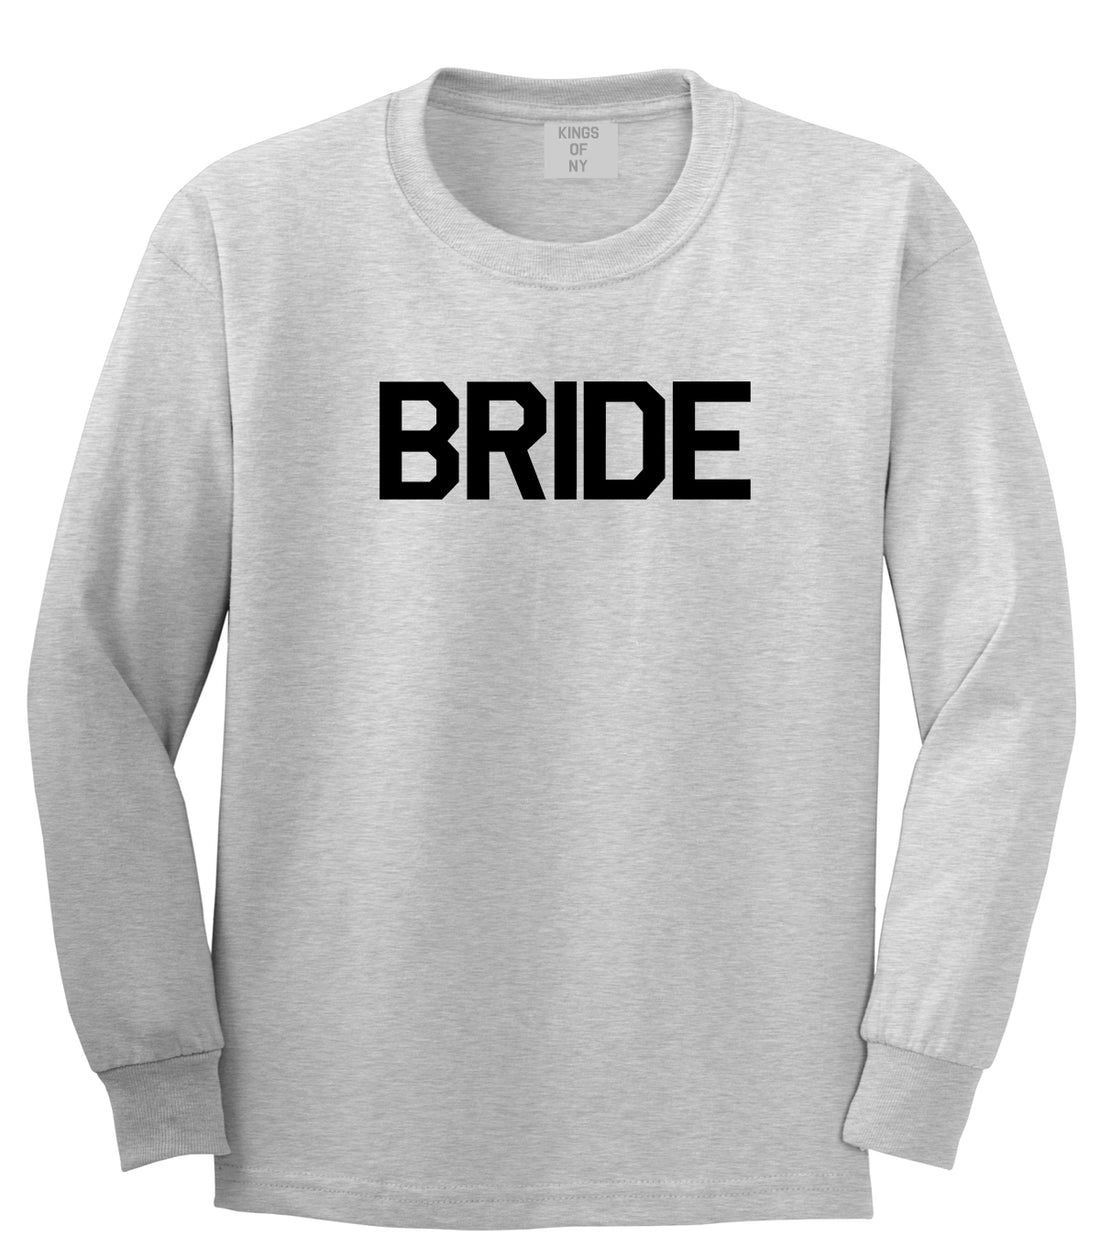 Bride Bachlorette Party Grey Long Sleeve T-Shirt by Kings Of NY